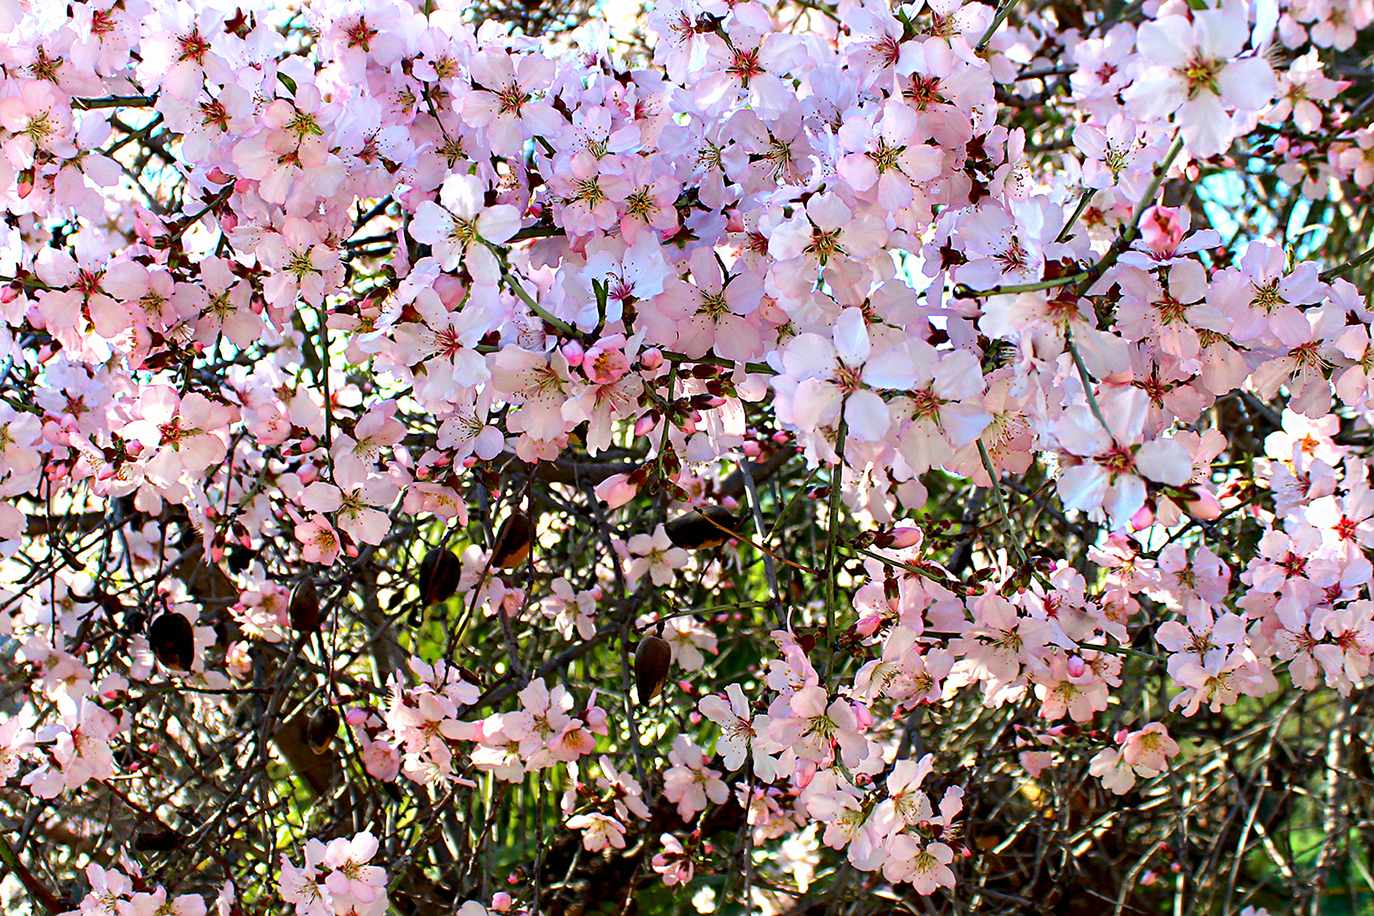 Blossomed almond tree